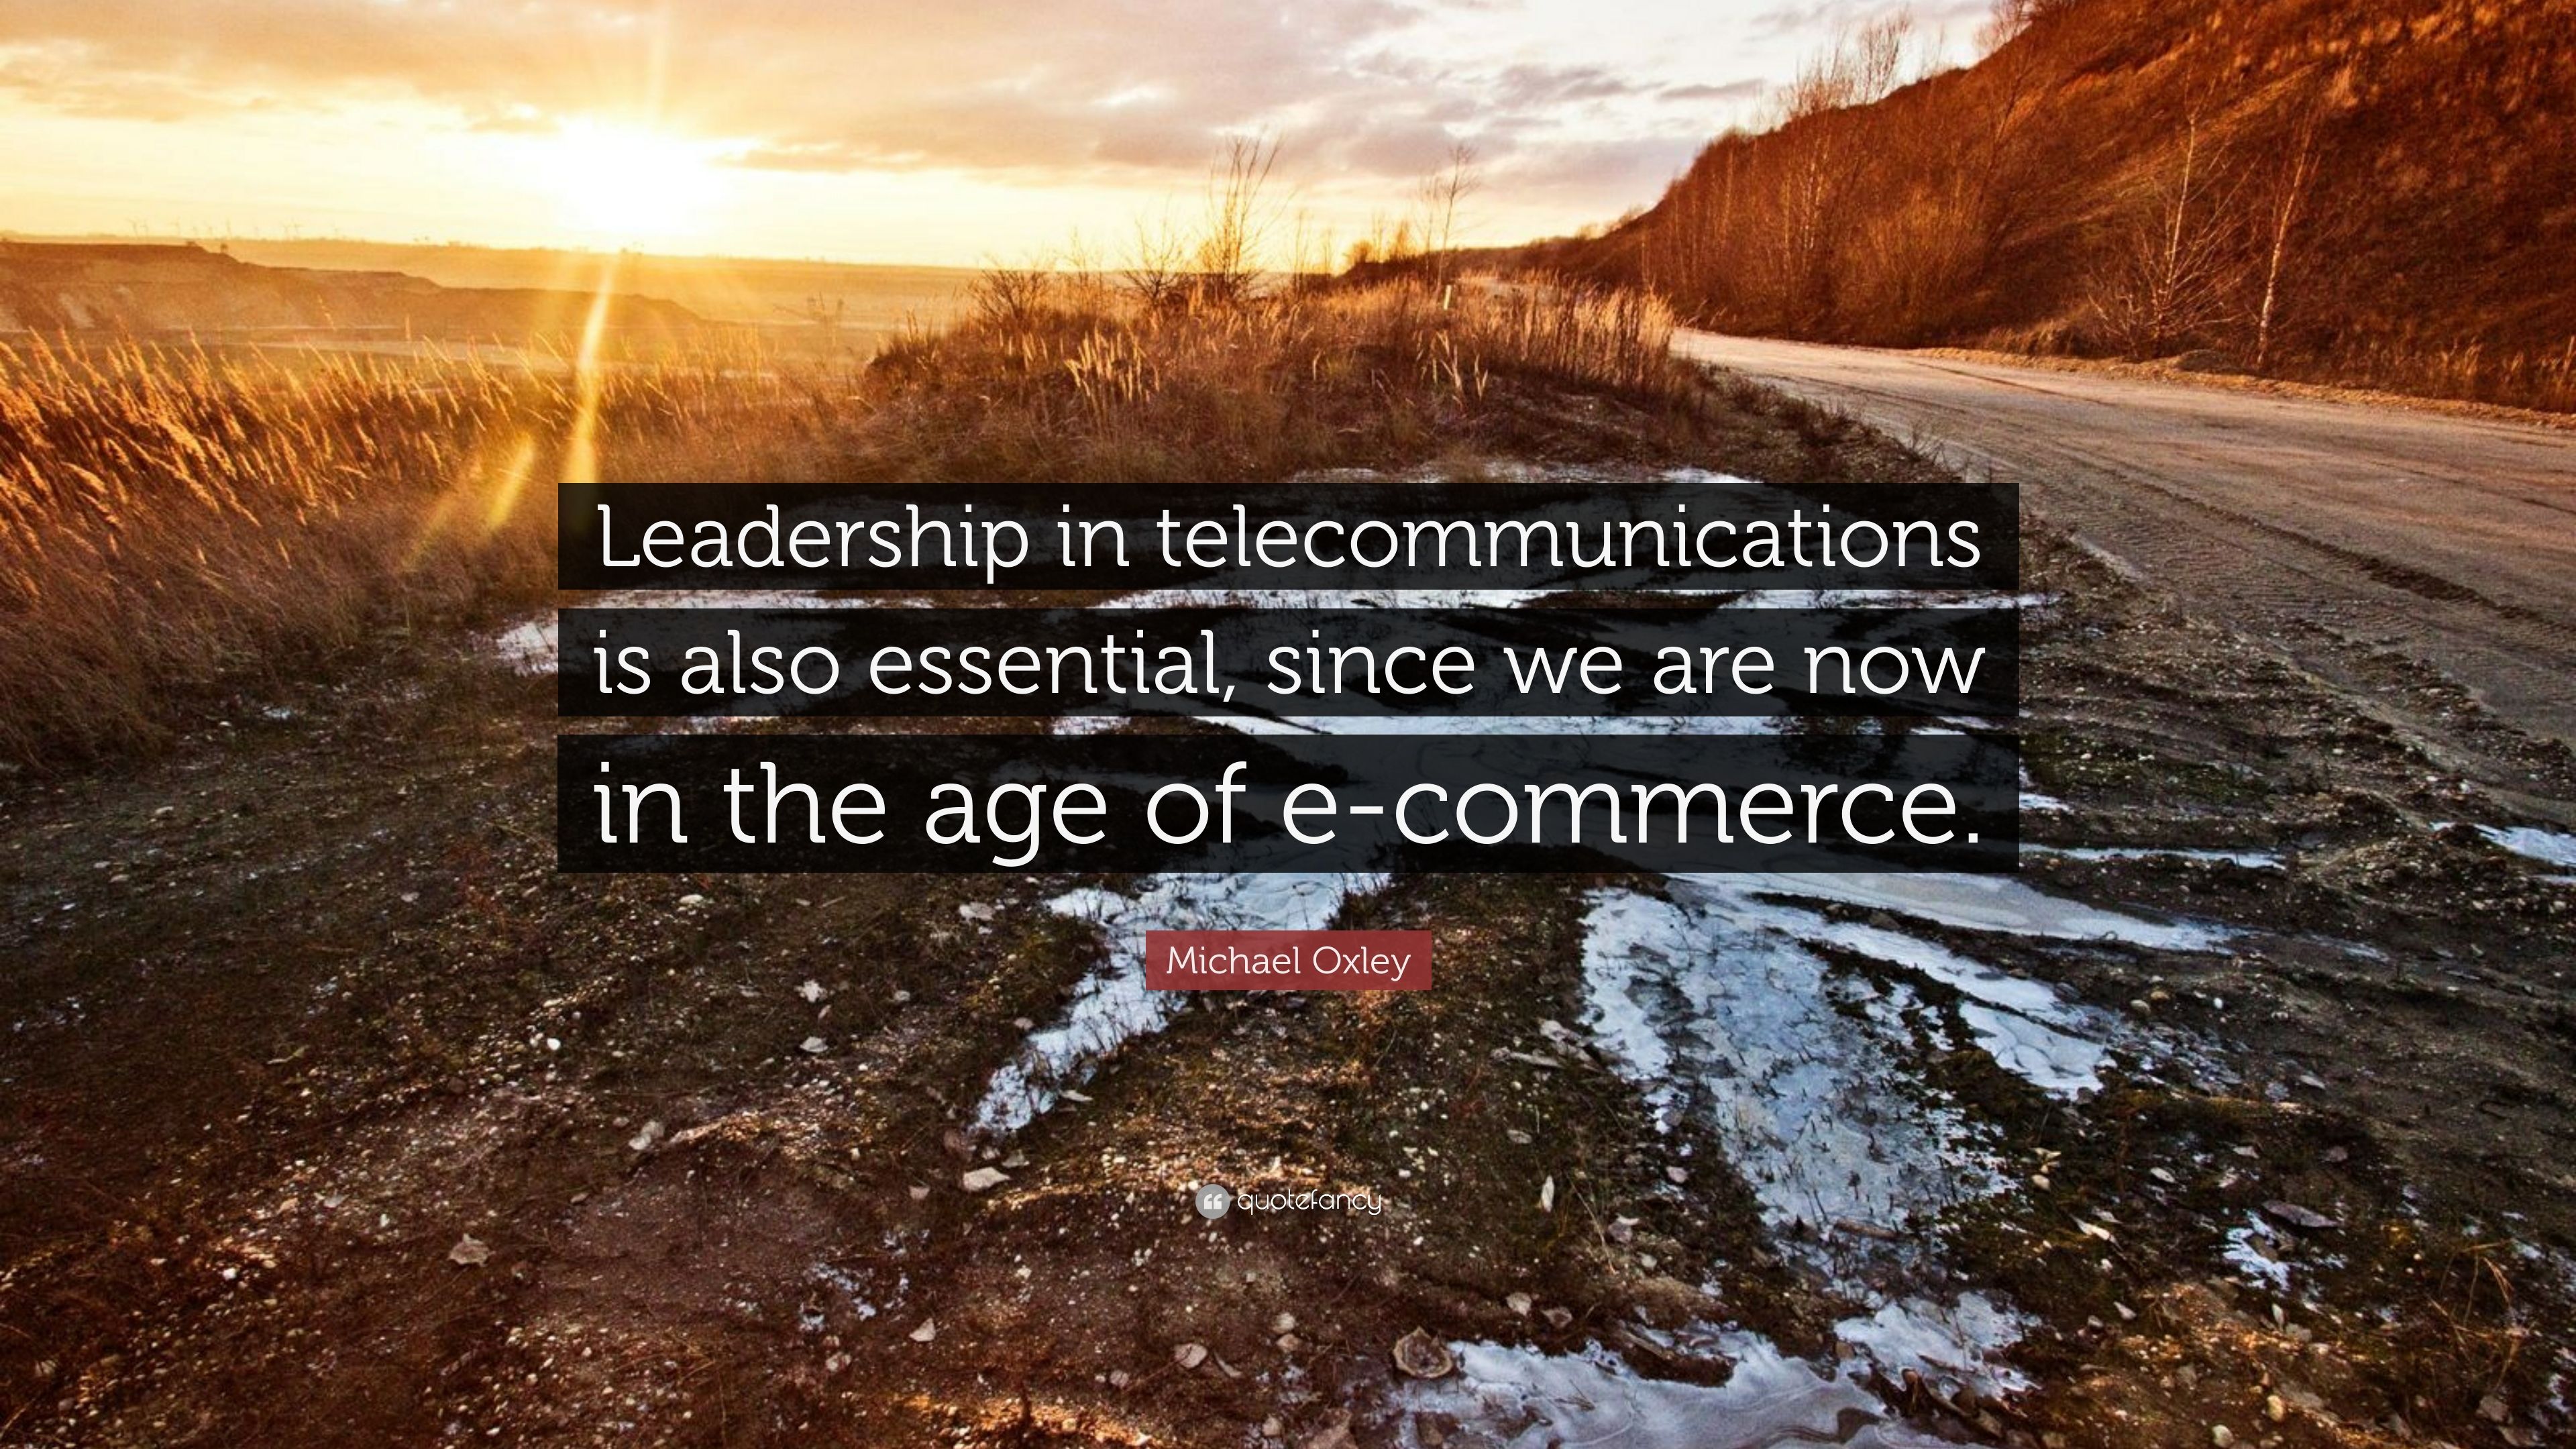 Michael Oxley Quote: “Leadership in telecommunications is also